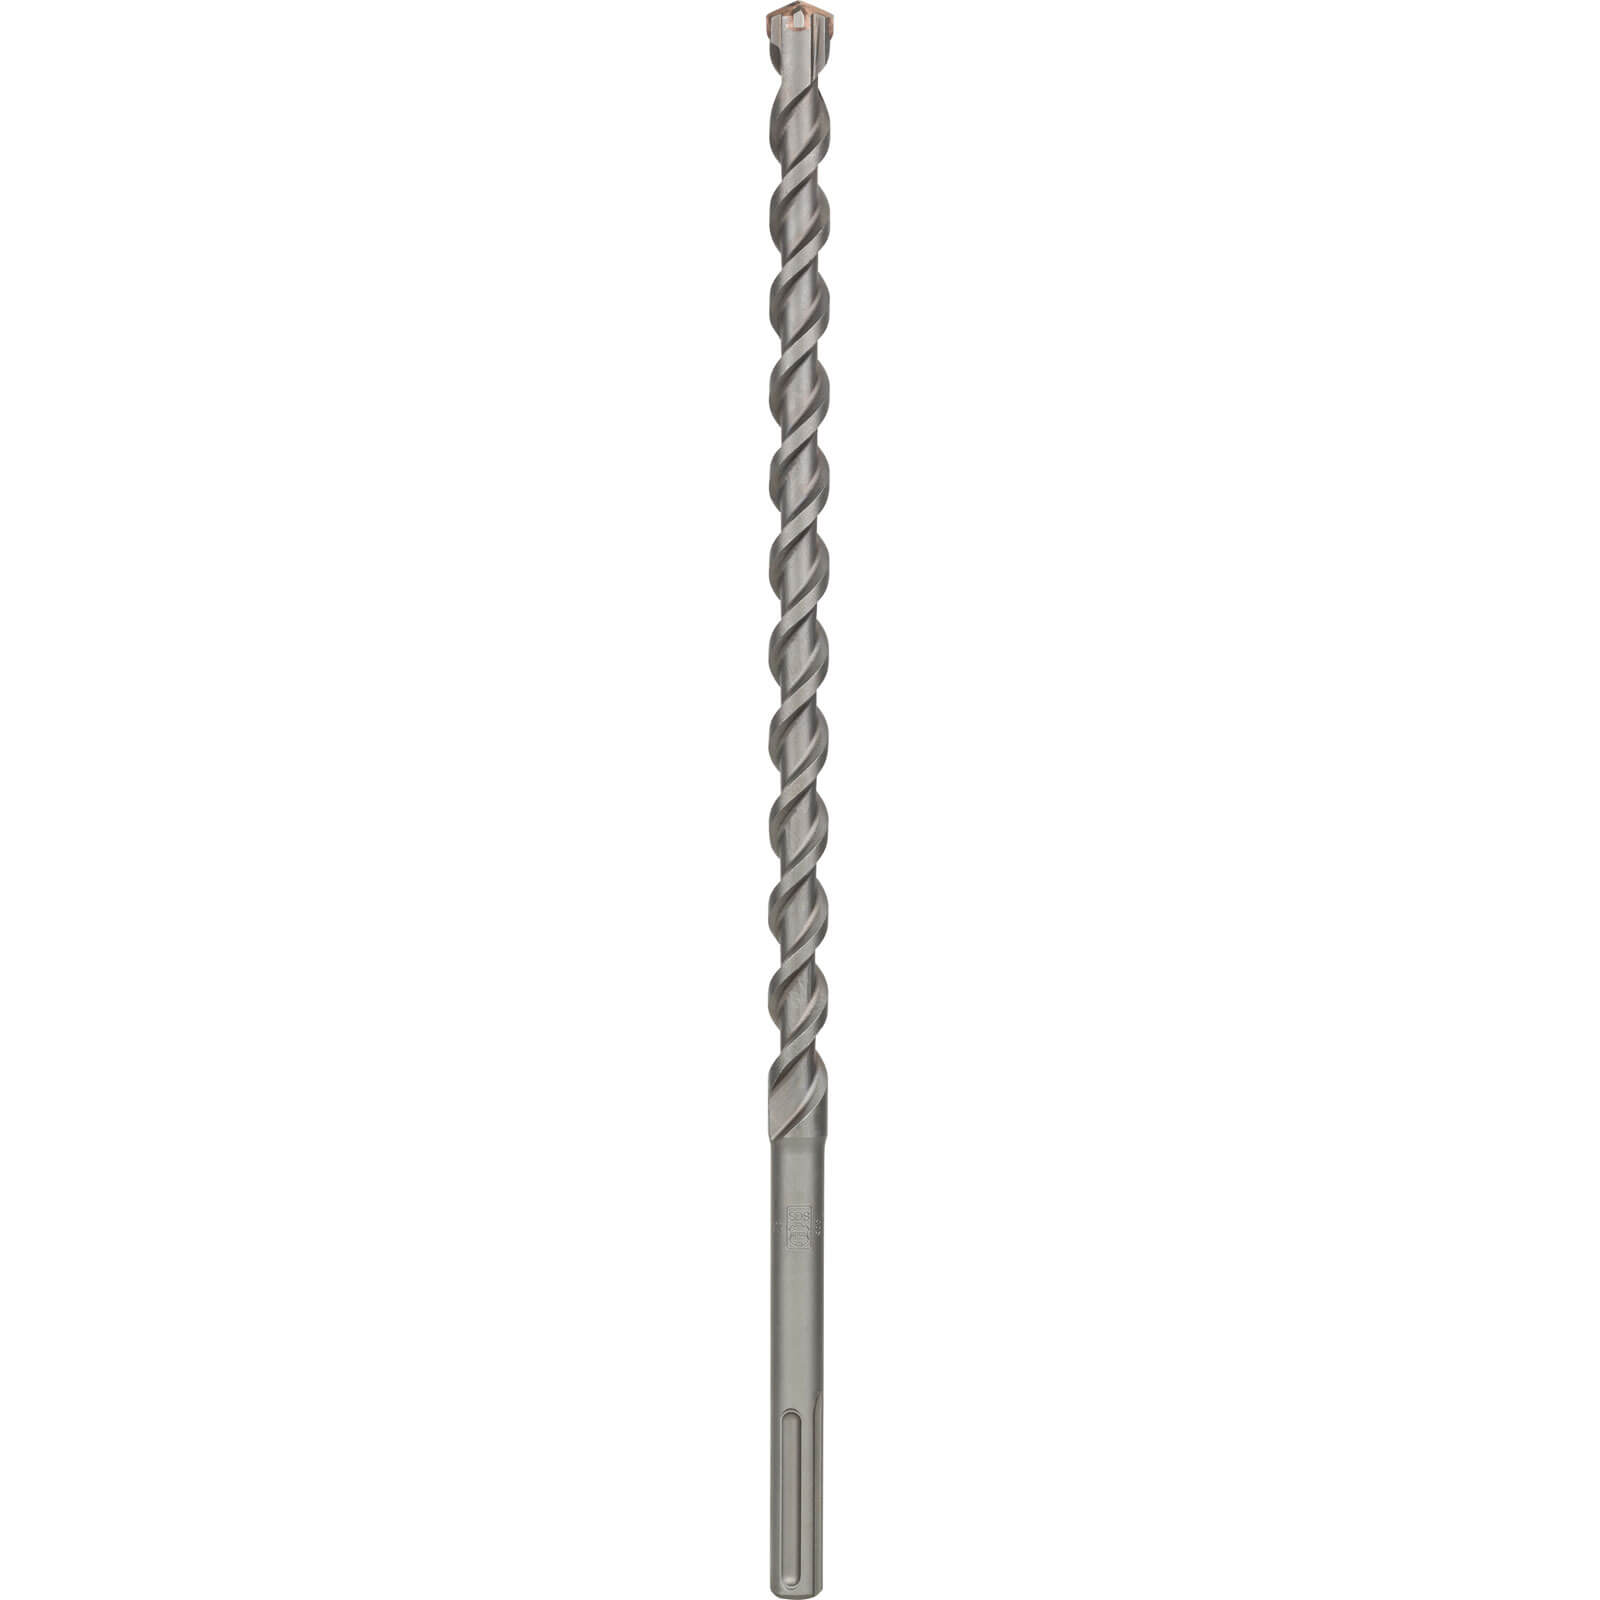 Image of Bosch M4 SDS Max Masonry Drill Bit 22mm 520mm Pack of 1